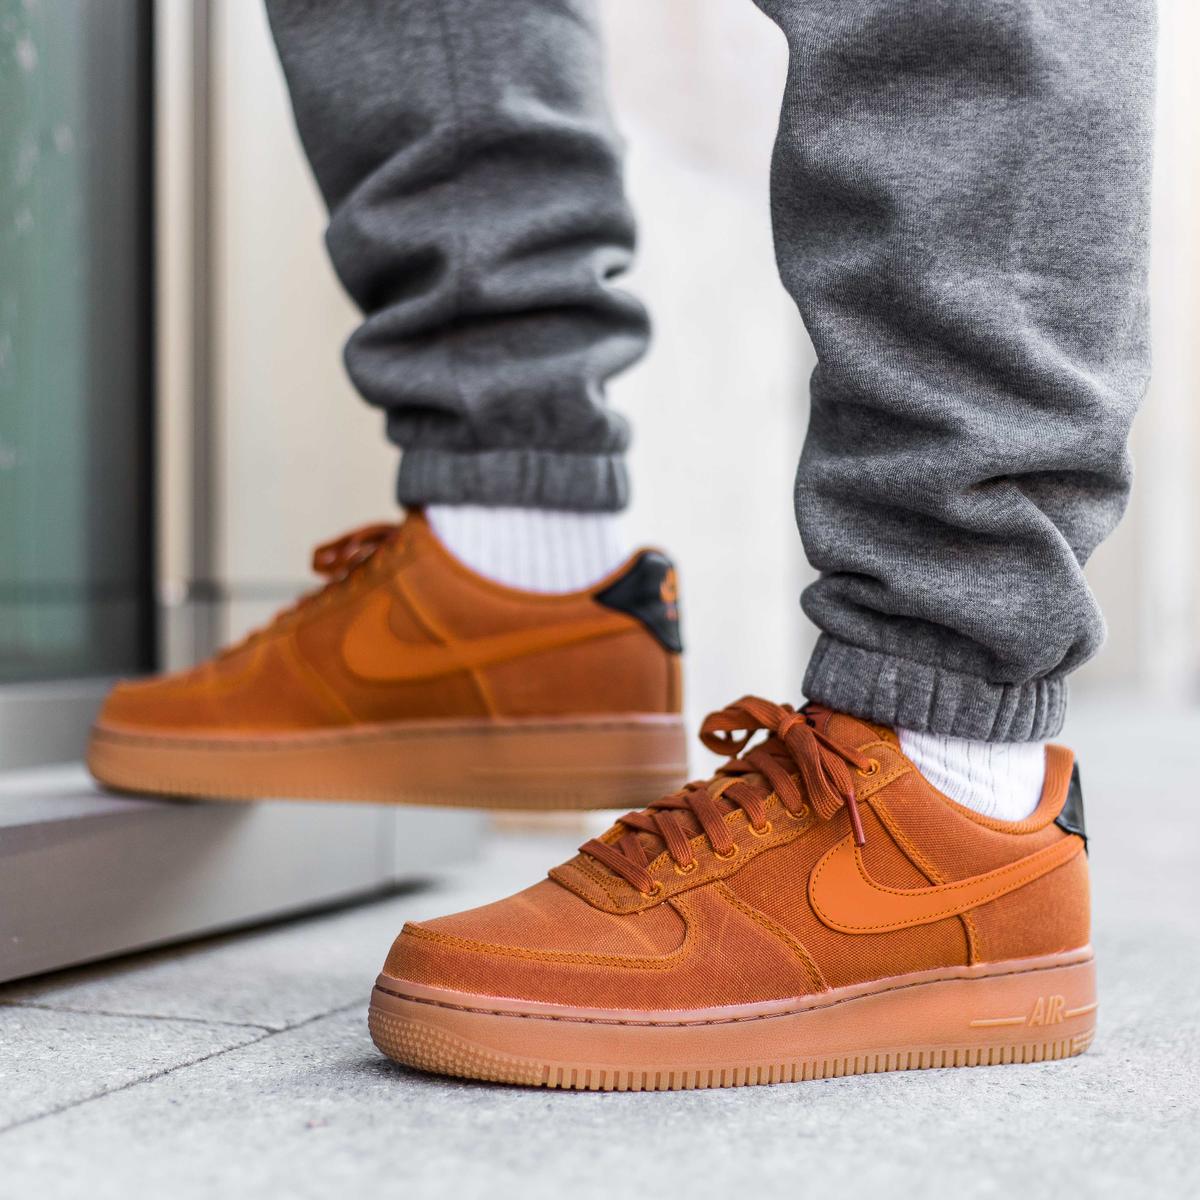 Introducing the Nike Air Force 1 '07 LV8 Brown/Night - Must-Have Sneaker  with Classic AF1 Style